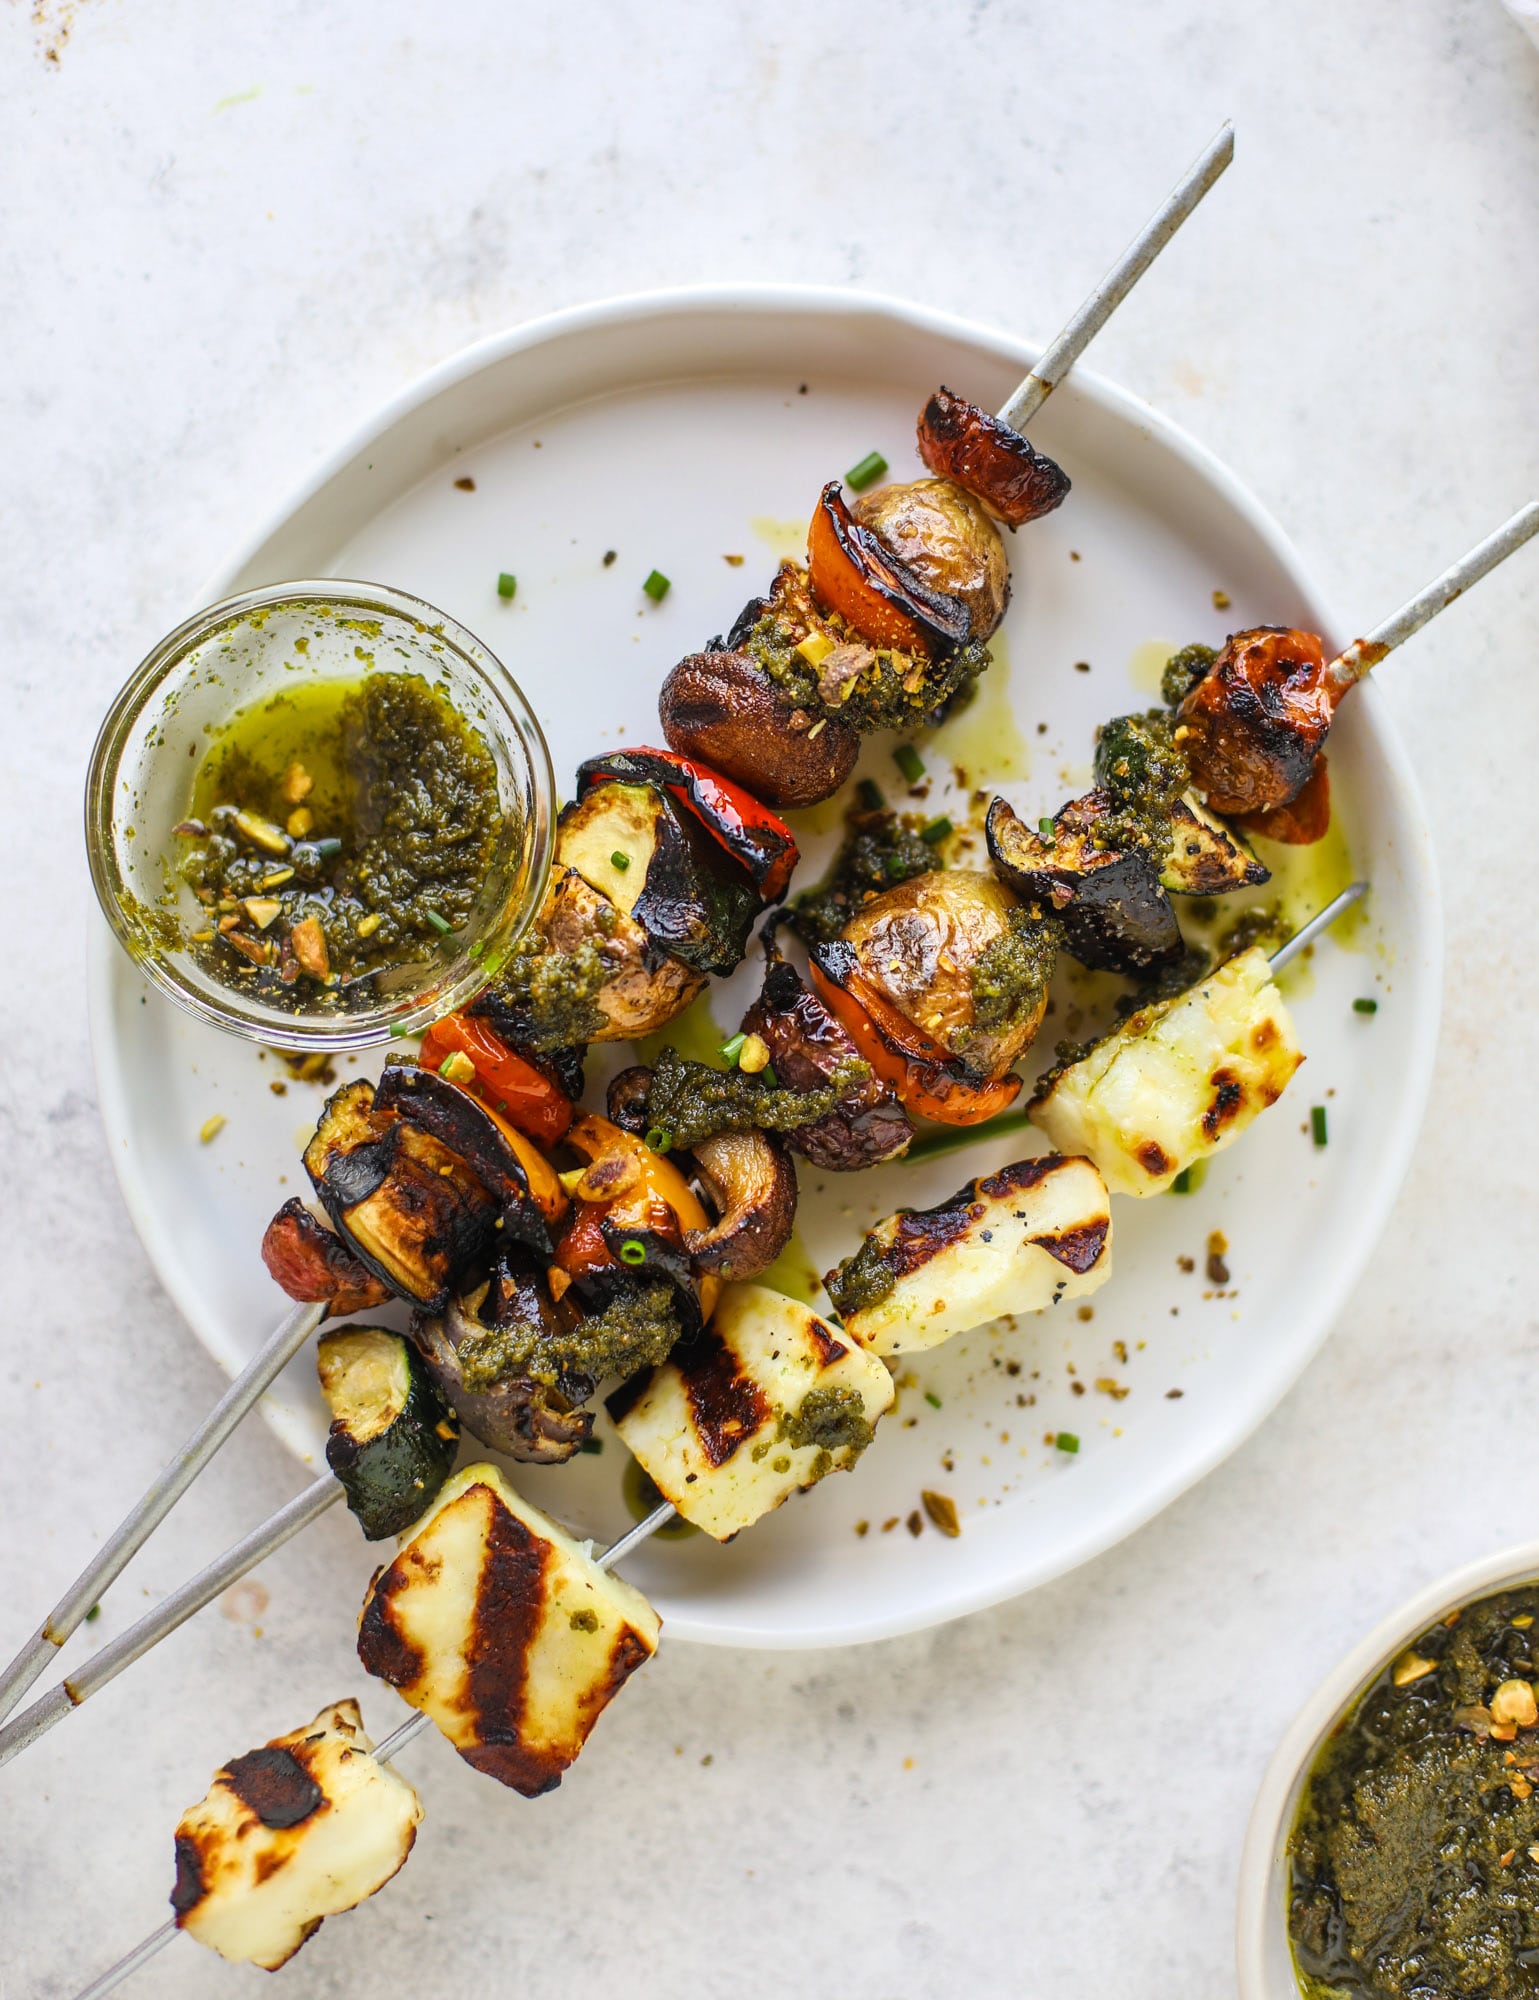 My all time favorite grilled vegetable skewers served with grilled halloumi cheese and pistachio pesto! Makes the best summer meal ever.